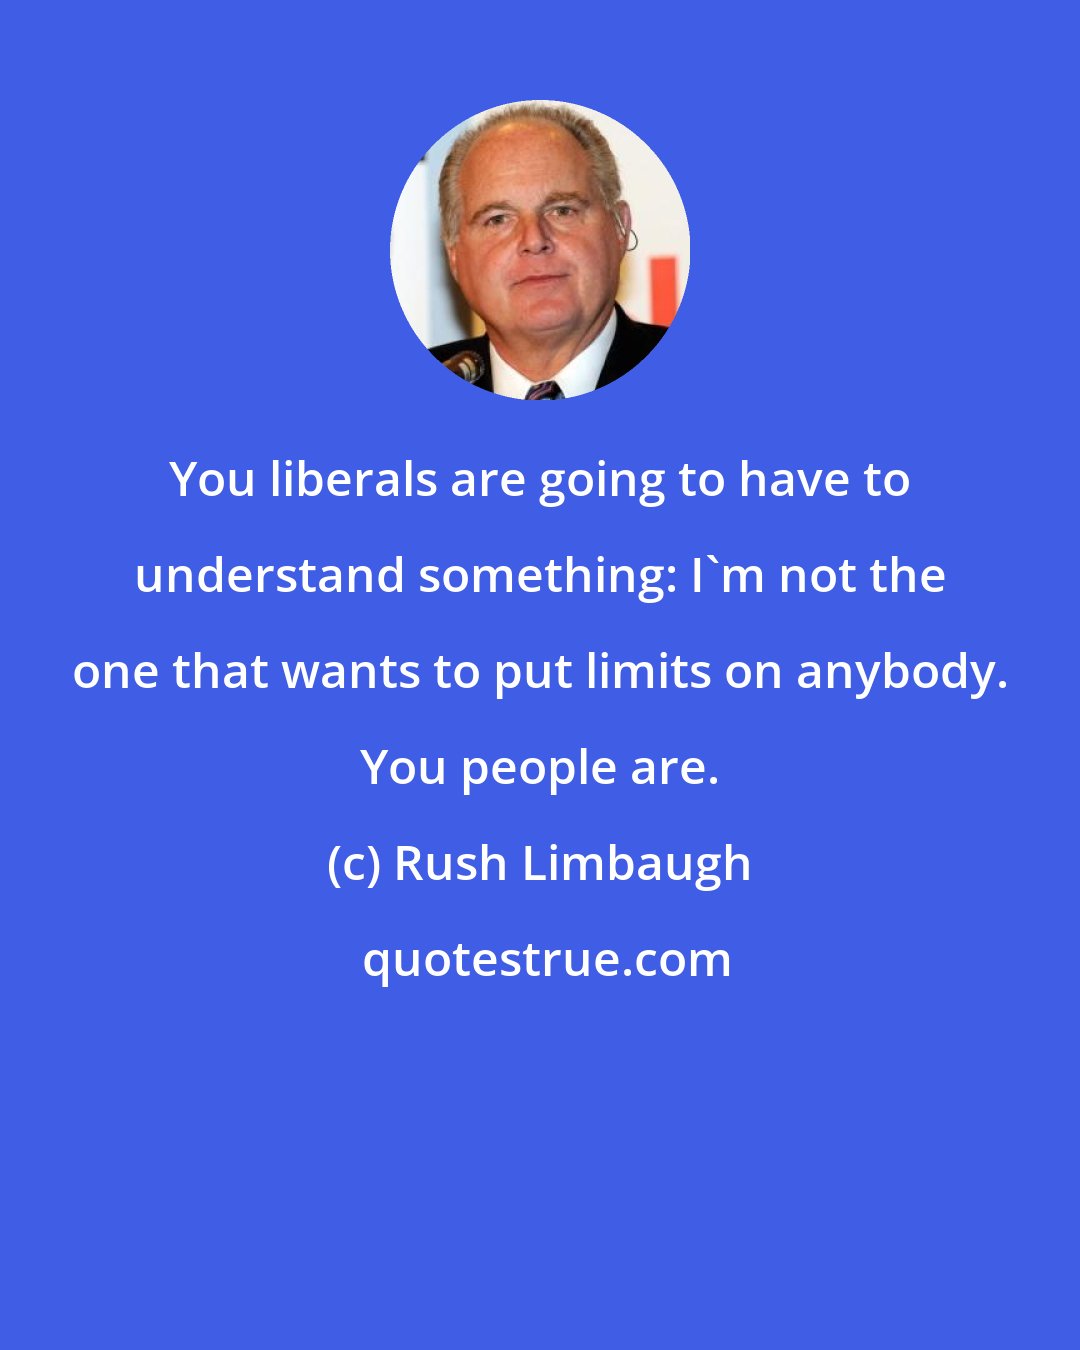 Rush Limbaugh: You liberals are going to have to understand something: I'm not the one that wants to put limits on anybody. You people are.